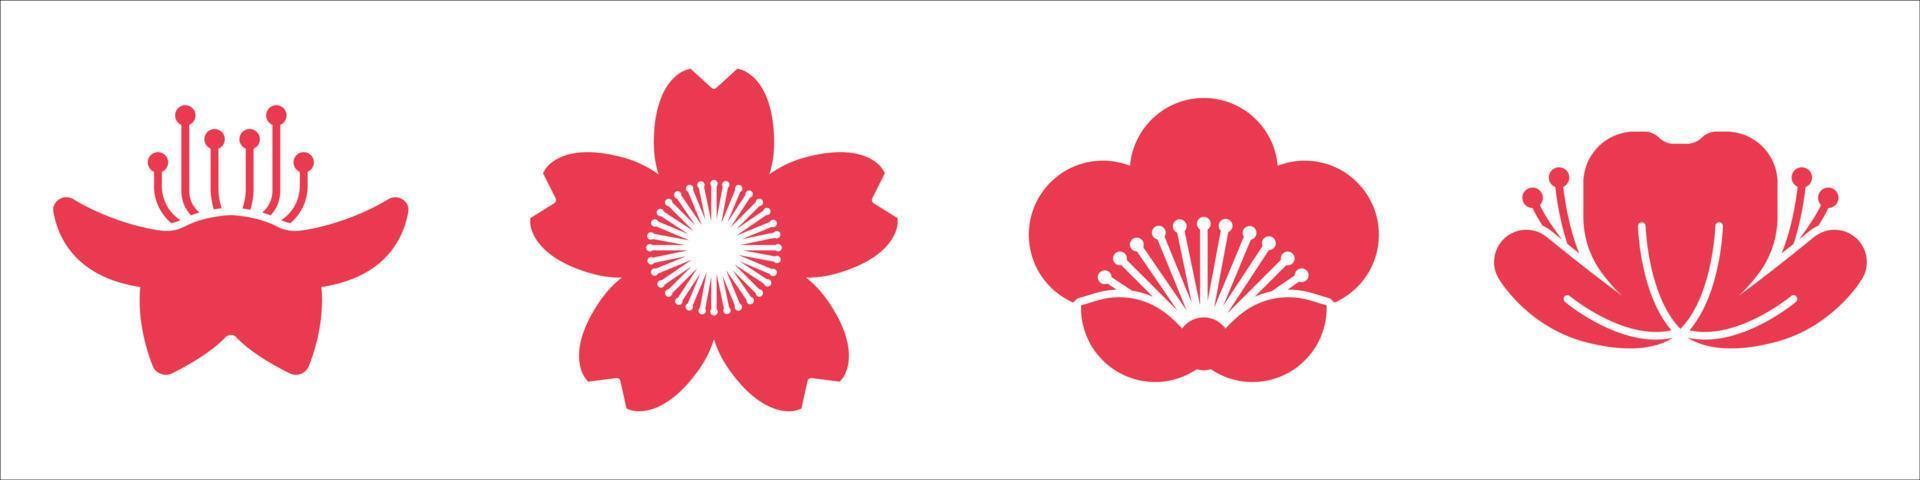 Cherry blossom icons vector